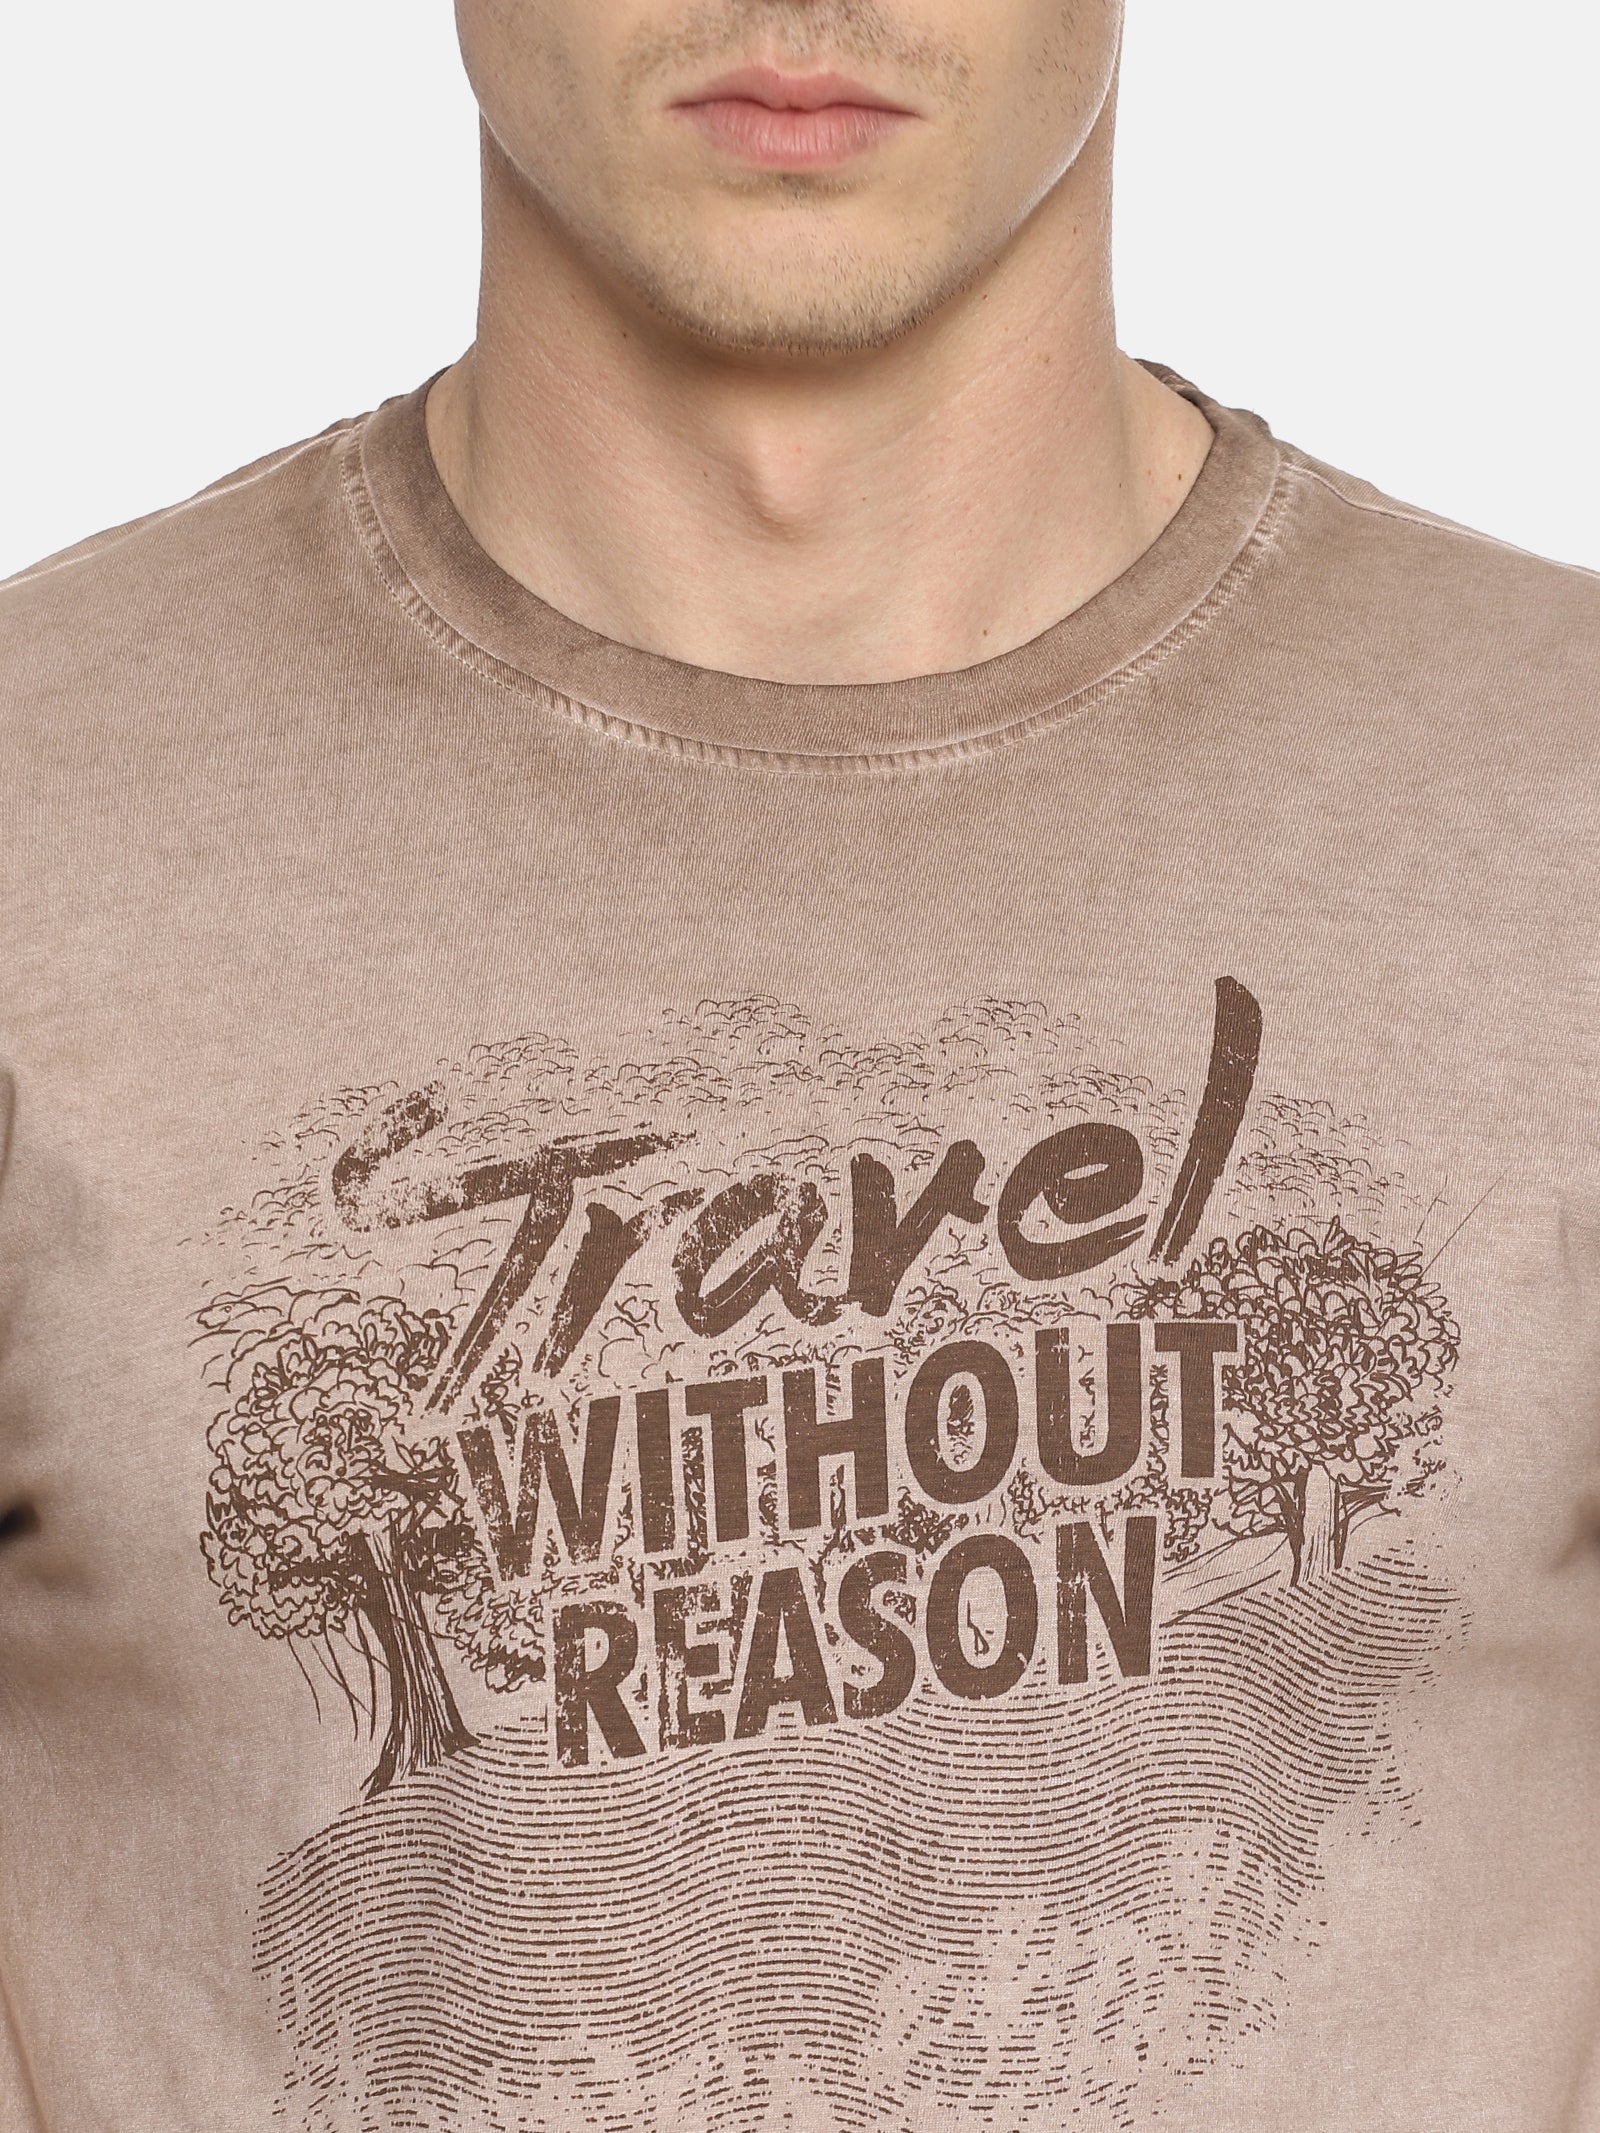 Travel Without Reason Brown Printed Men T-Shirt Wolfpack